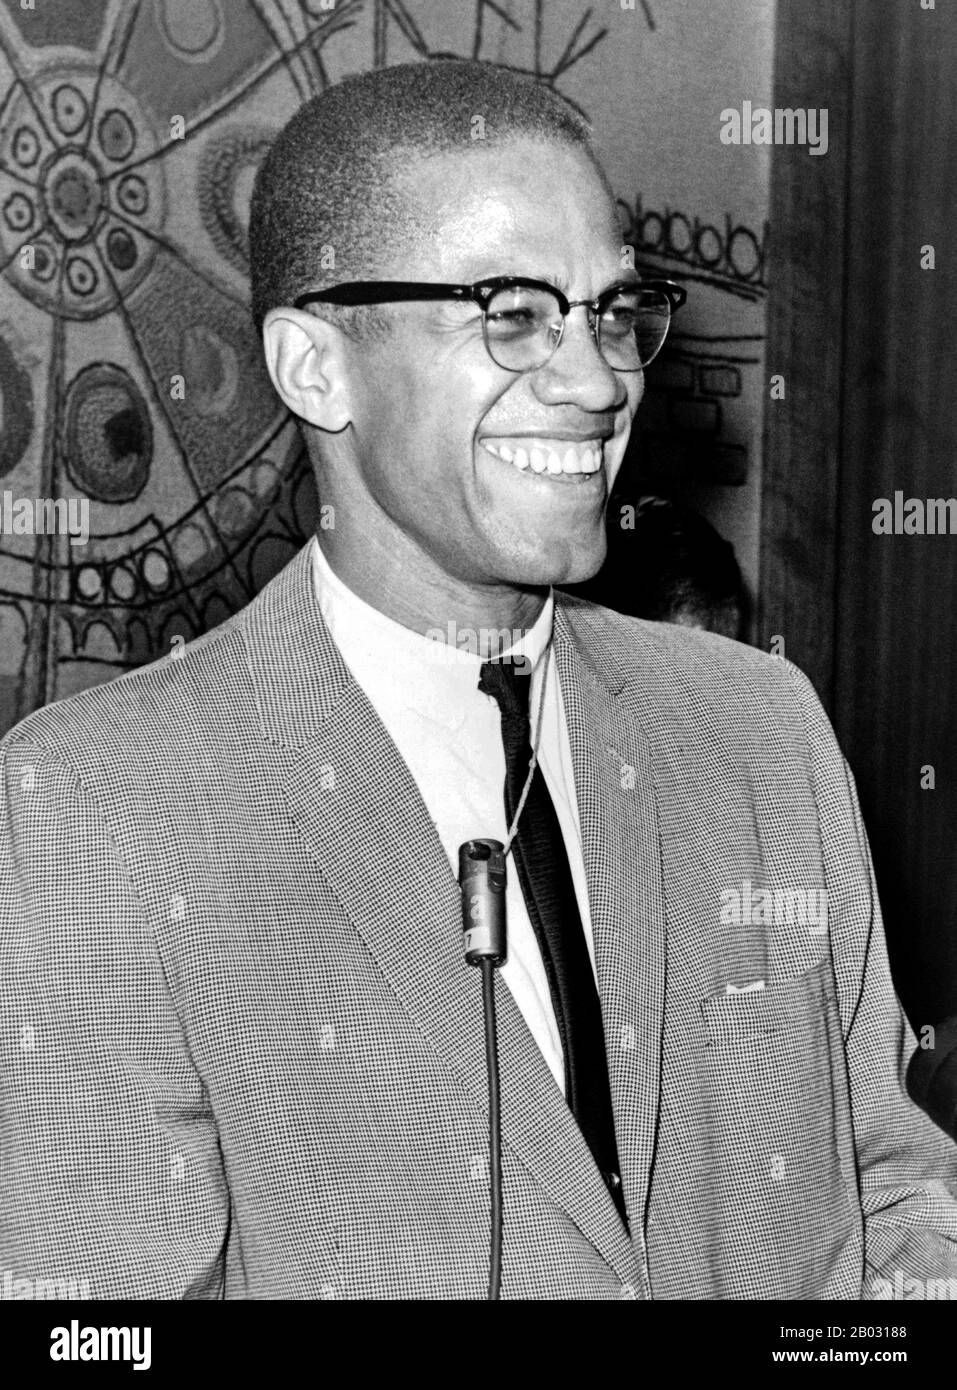 Malcolm X ( May 19, 1925 – February 21, 1965), born Malcolm Little and also known as el-Hajj Malik el-Shabazz, was an American Muslim minister and a human rights activist.  To his admirers he was a courageous advocate for the rights of blacks, a man who indicted white America in the harshest terms for its crimes against black Americans; detractors accused him of preaching racism and violence. He has been called one of the greatest and most influential African Americans in history. Stock Photo